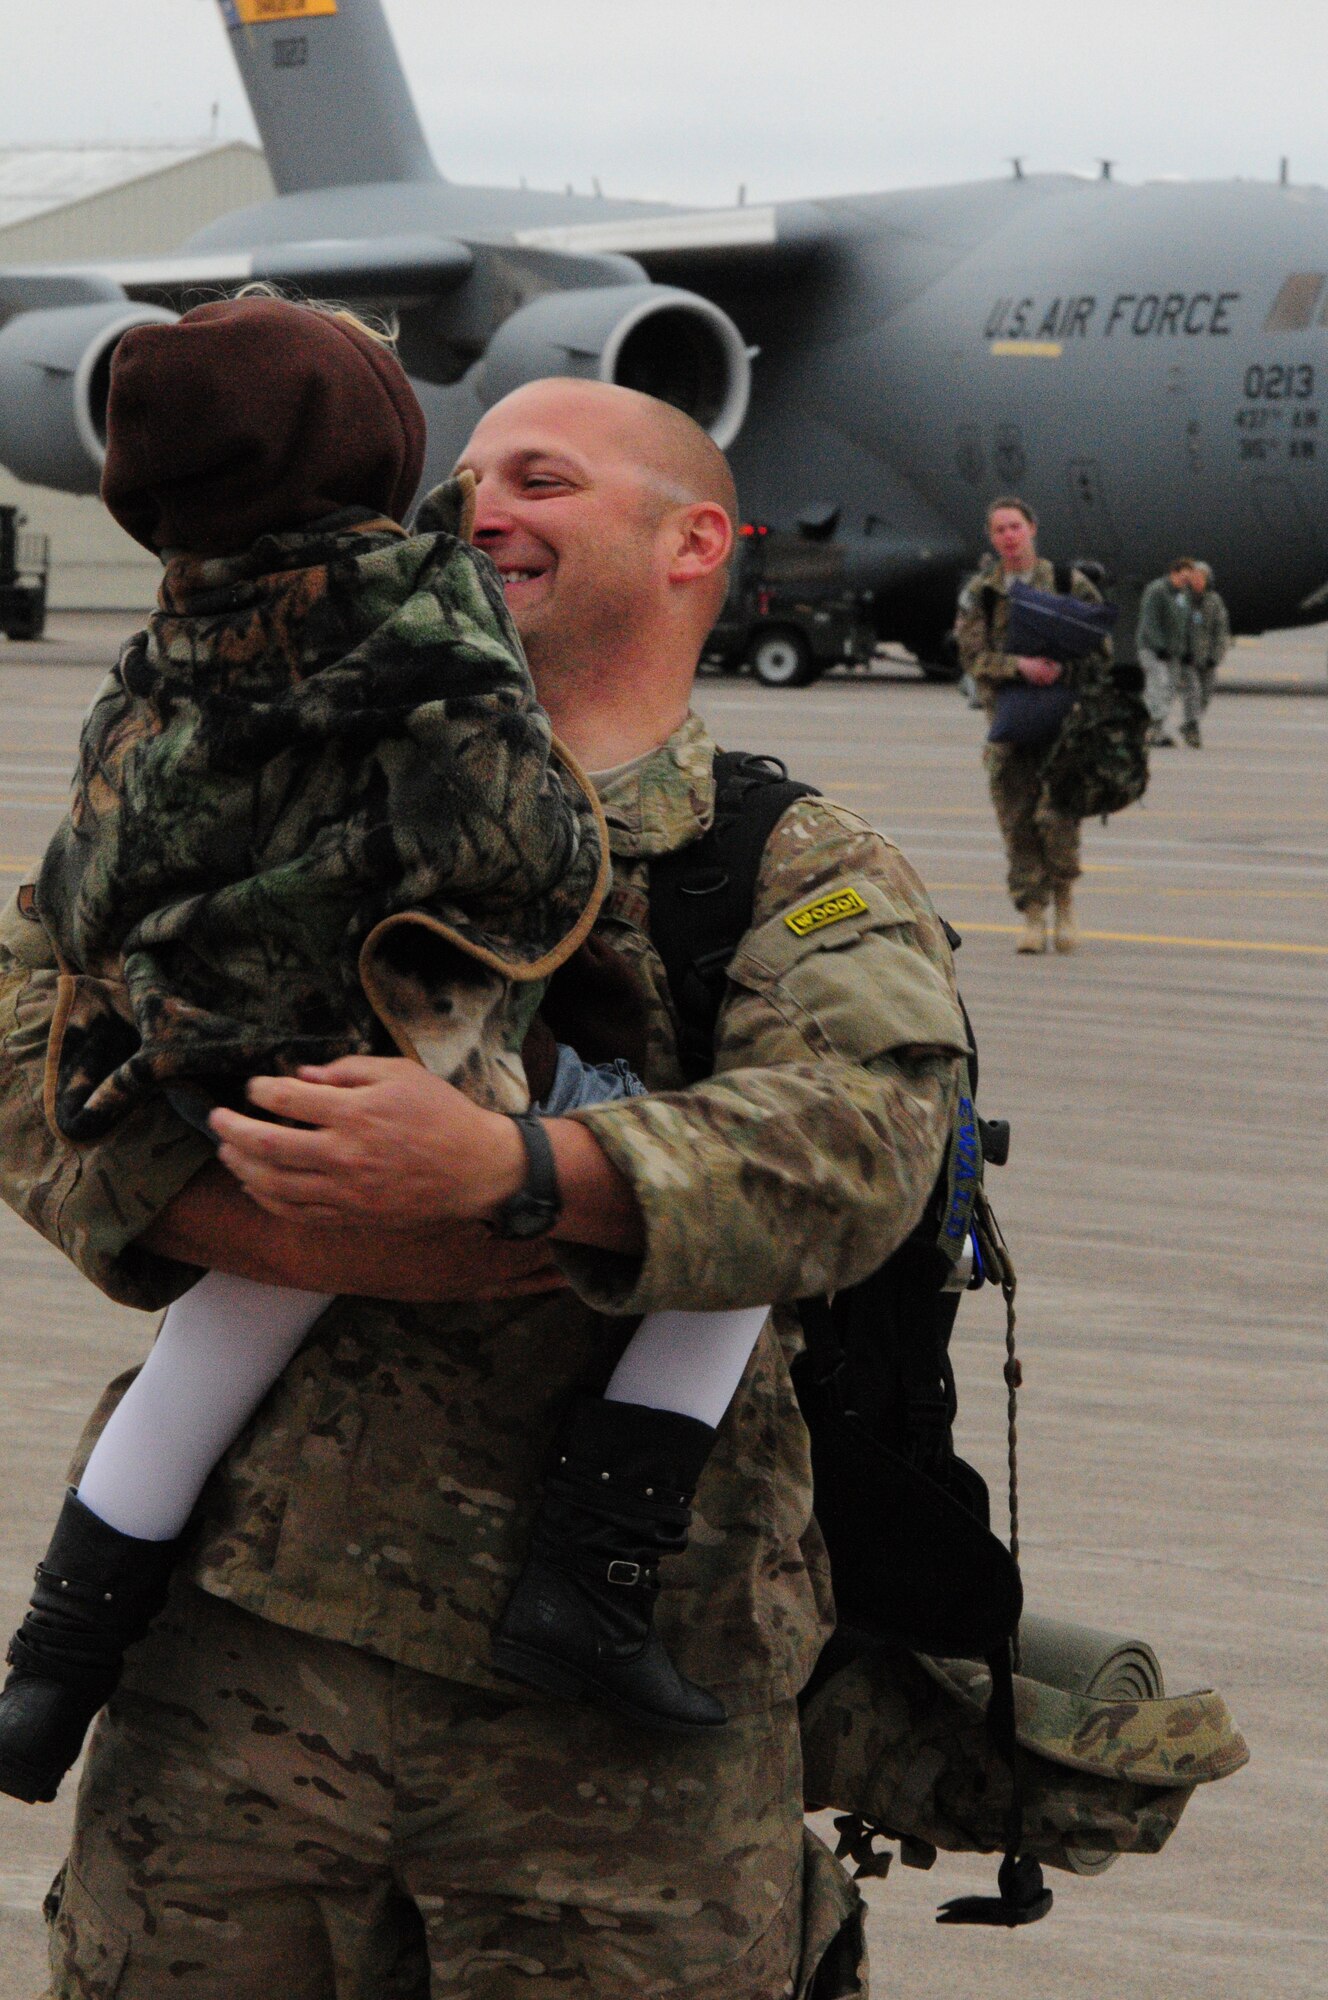 A 148th Fighter Wing member is greeted by his daughter after returning from Kandahar Airfield, Afghanistan, Oct. 22, 2012.  The 148th Fighter Wing, Minnesota Air National Guard, deployed approximately 300 airmen to Afghanistan in August, 2012 in support of Operation Enduring Freedom.  (National Guard photo by Tech. Sgt. Brett R. Ewald/ Released)